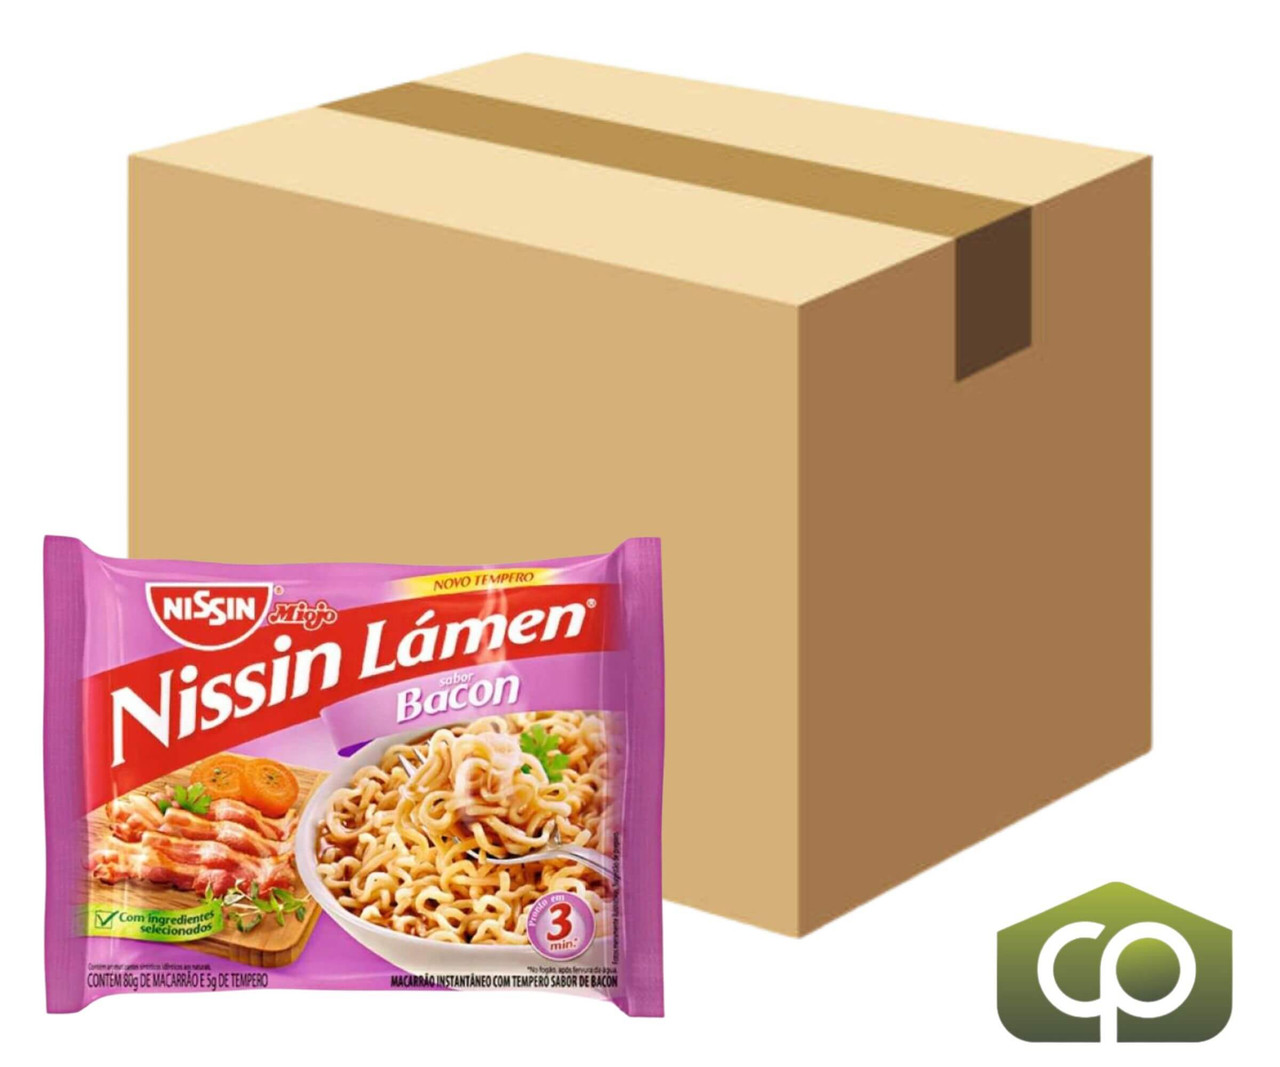 Nissin Instant Noodles - Convenient Pack of  (50/Case)85g - Quick and Easy - Chicken Pieces